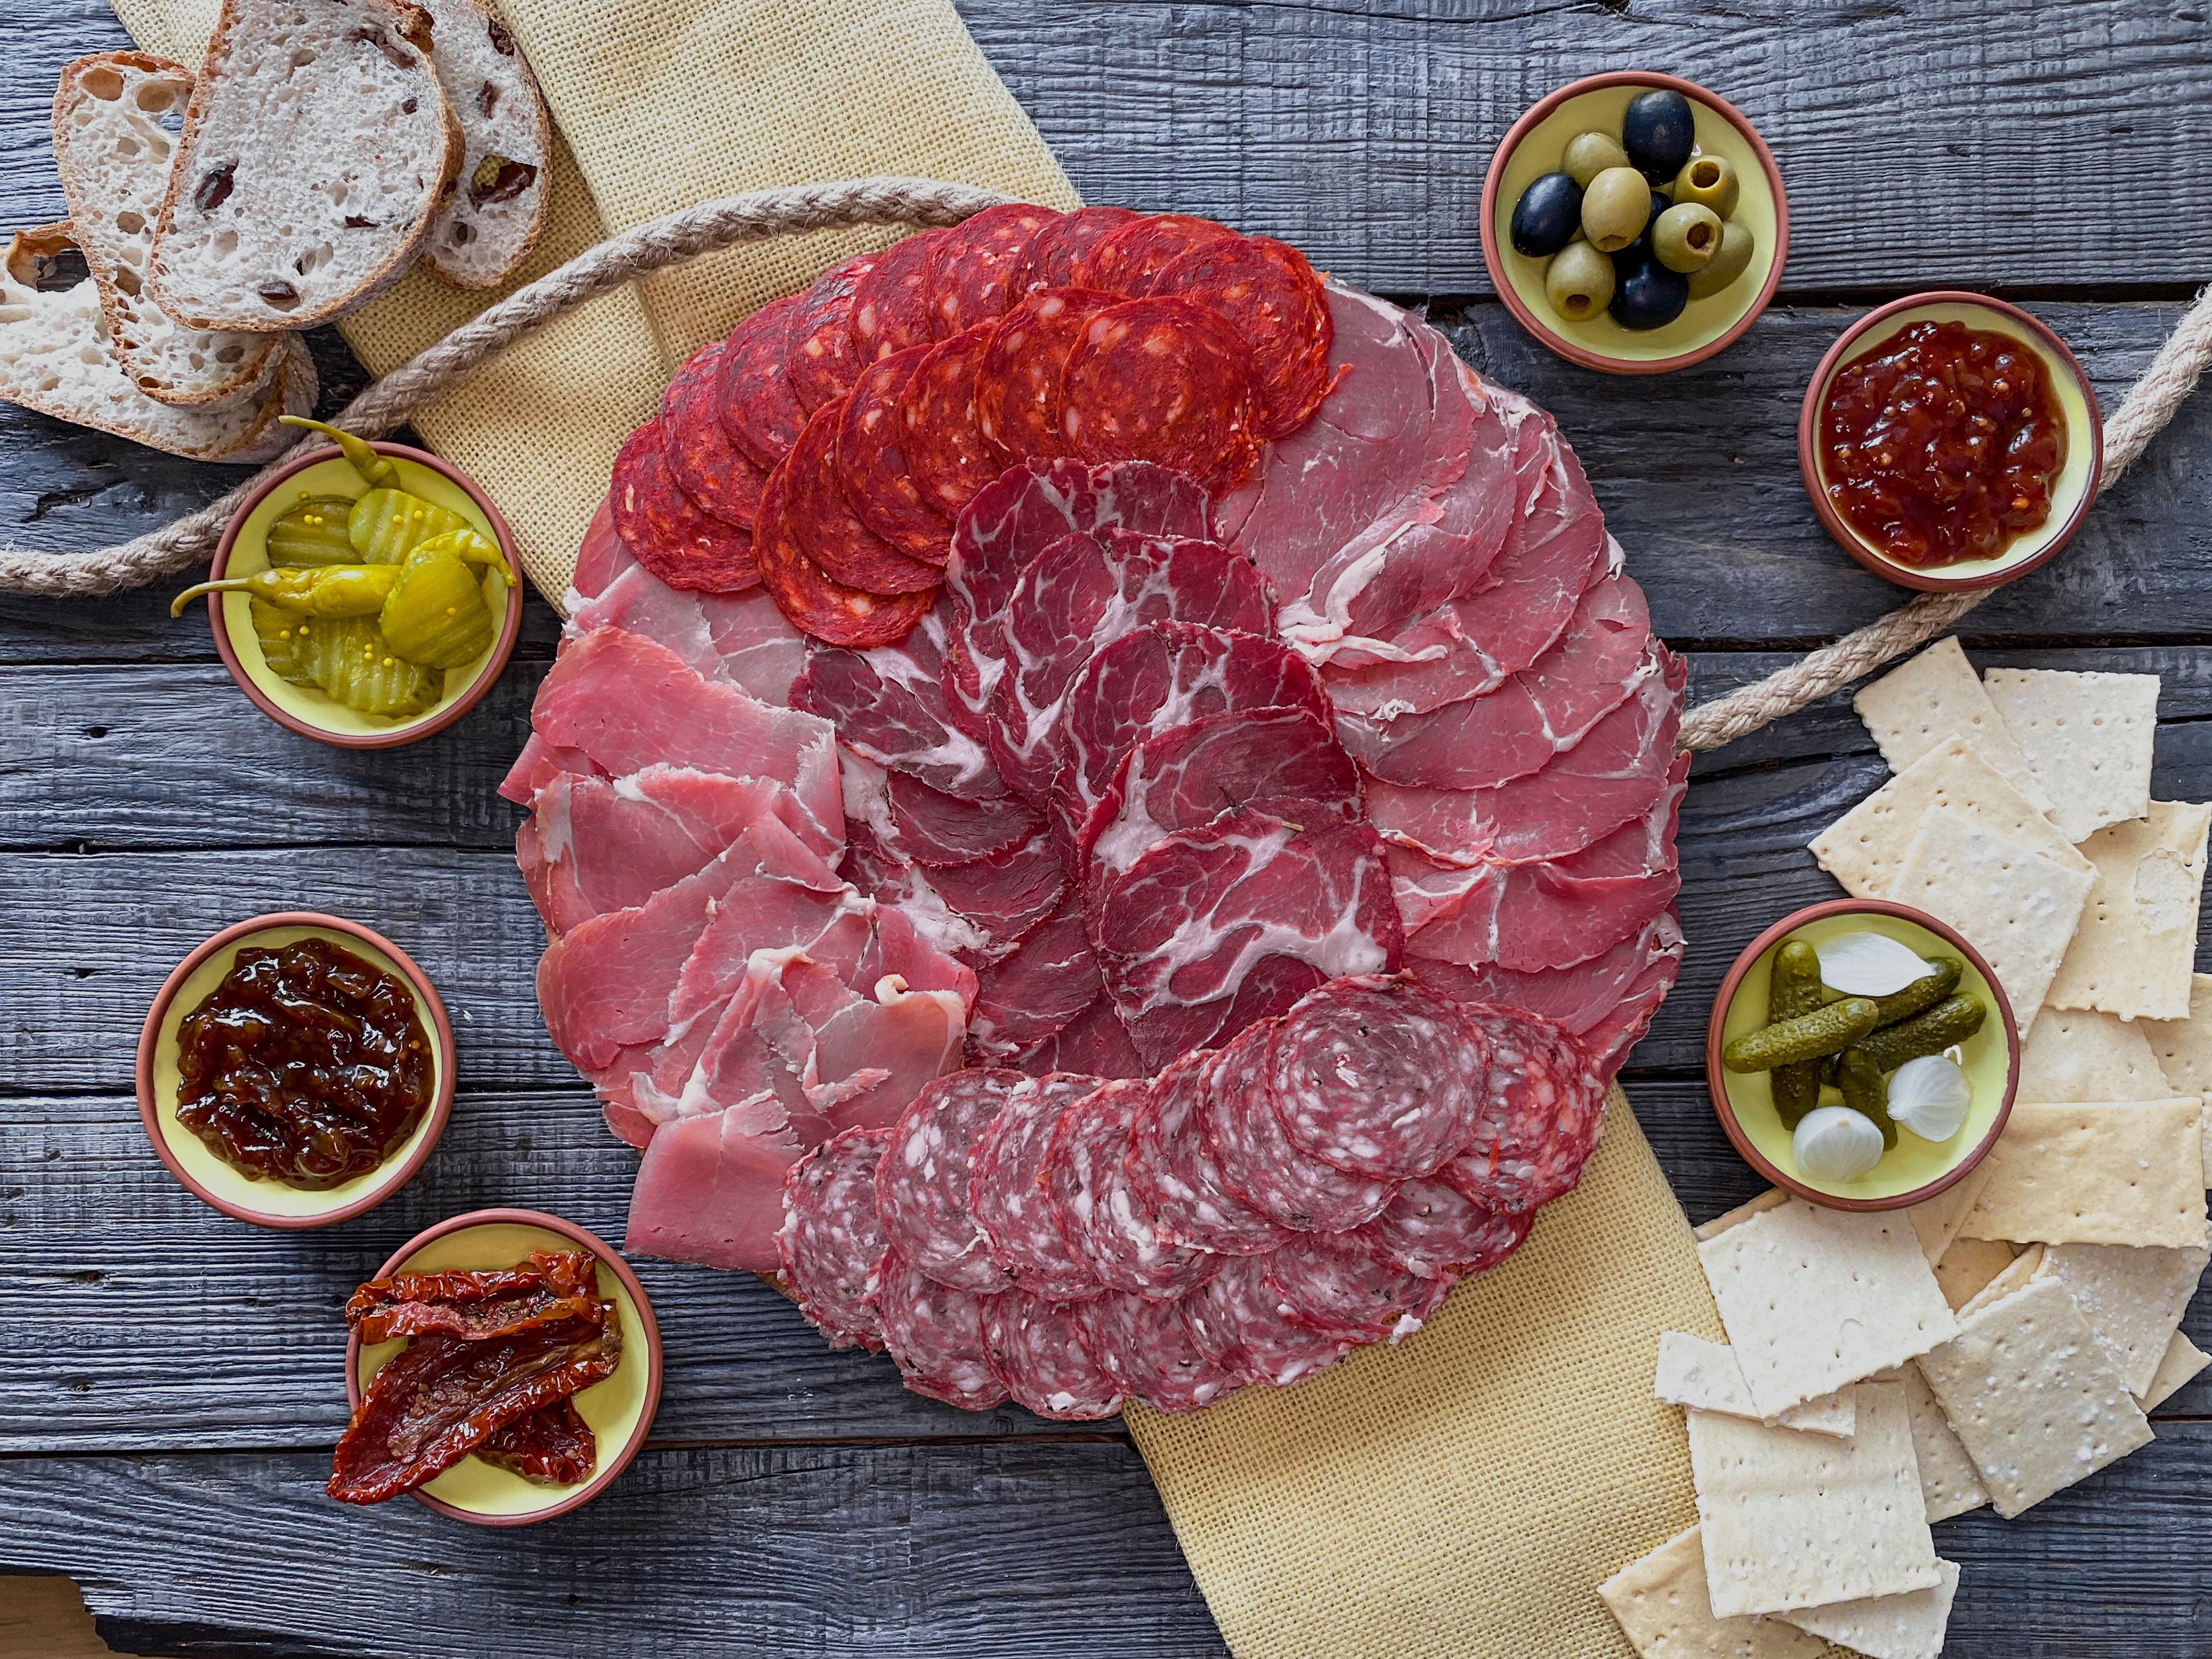 Five types of sliced cured meats on a circular wooden board. Six clay dishes, two containing pickles, 2 of chutney and one each of olives and sundried tomatoes. Four slices of sourdough bread and an array of crackers.